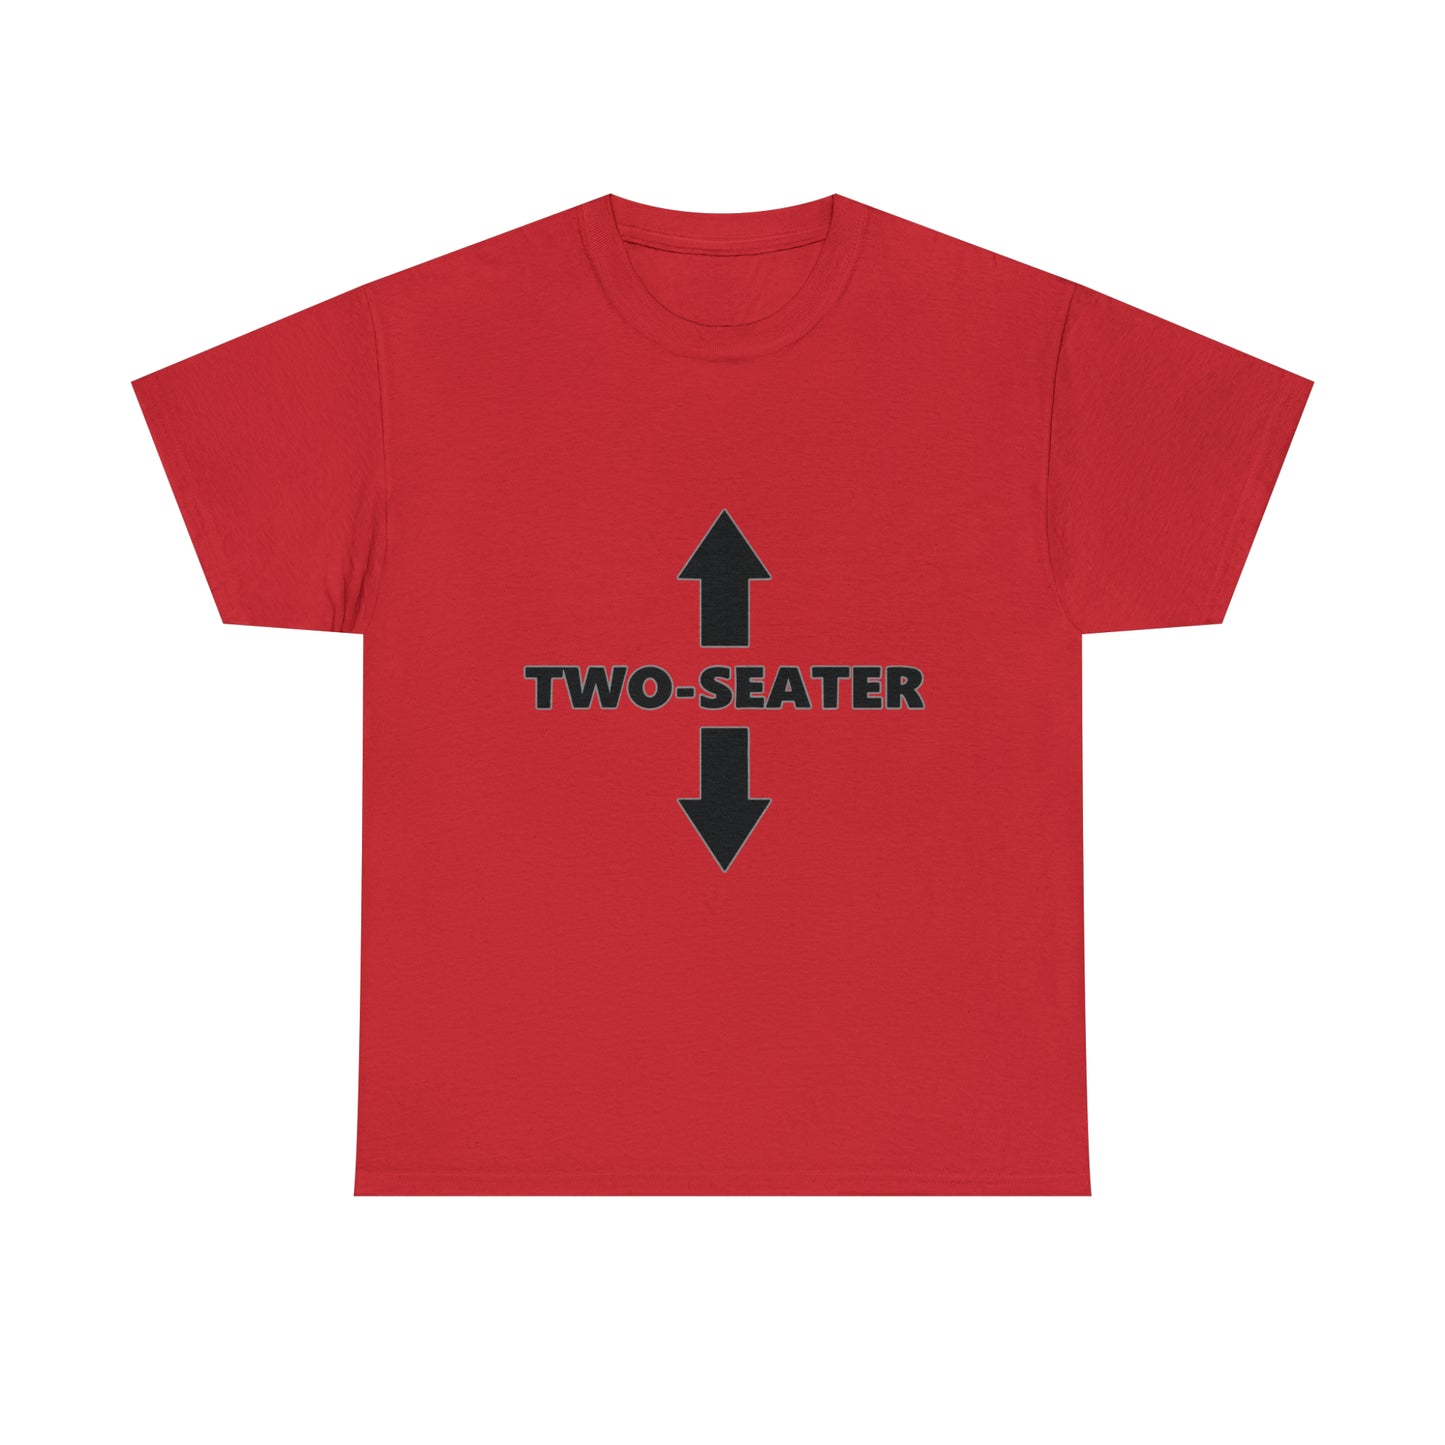 "Two-Seater" Tee